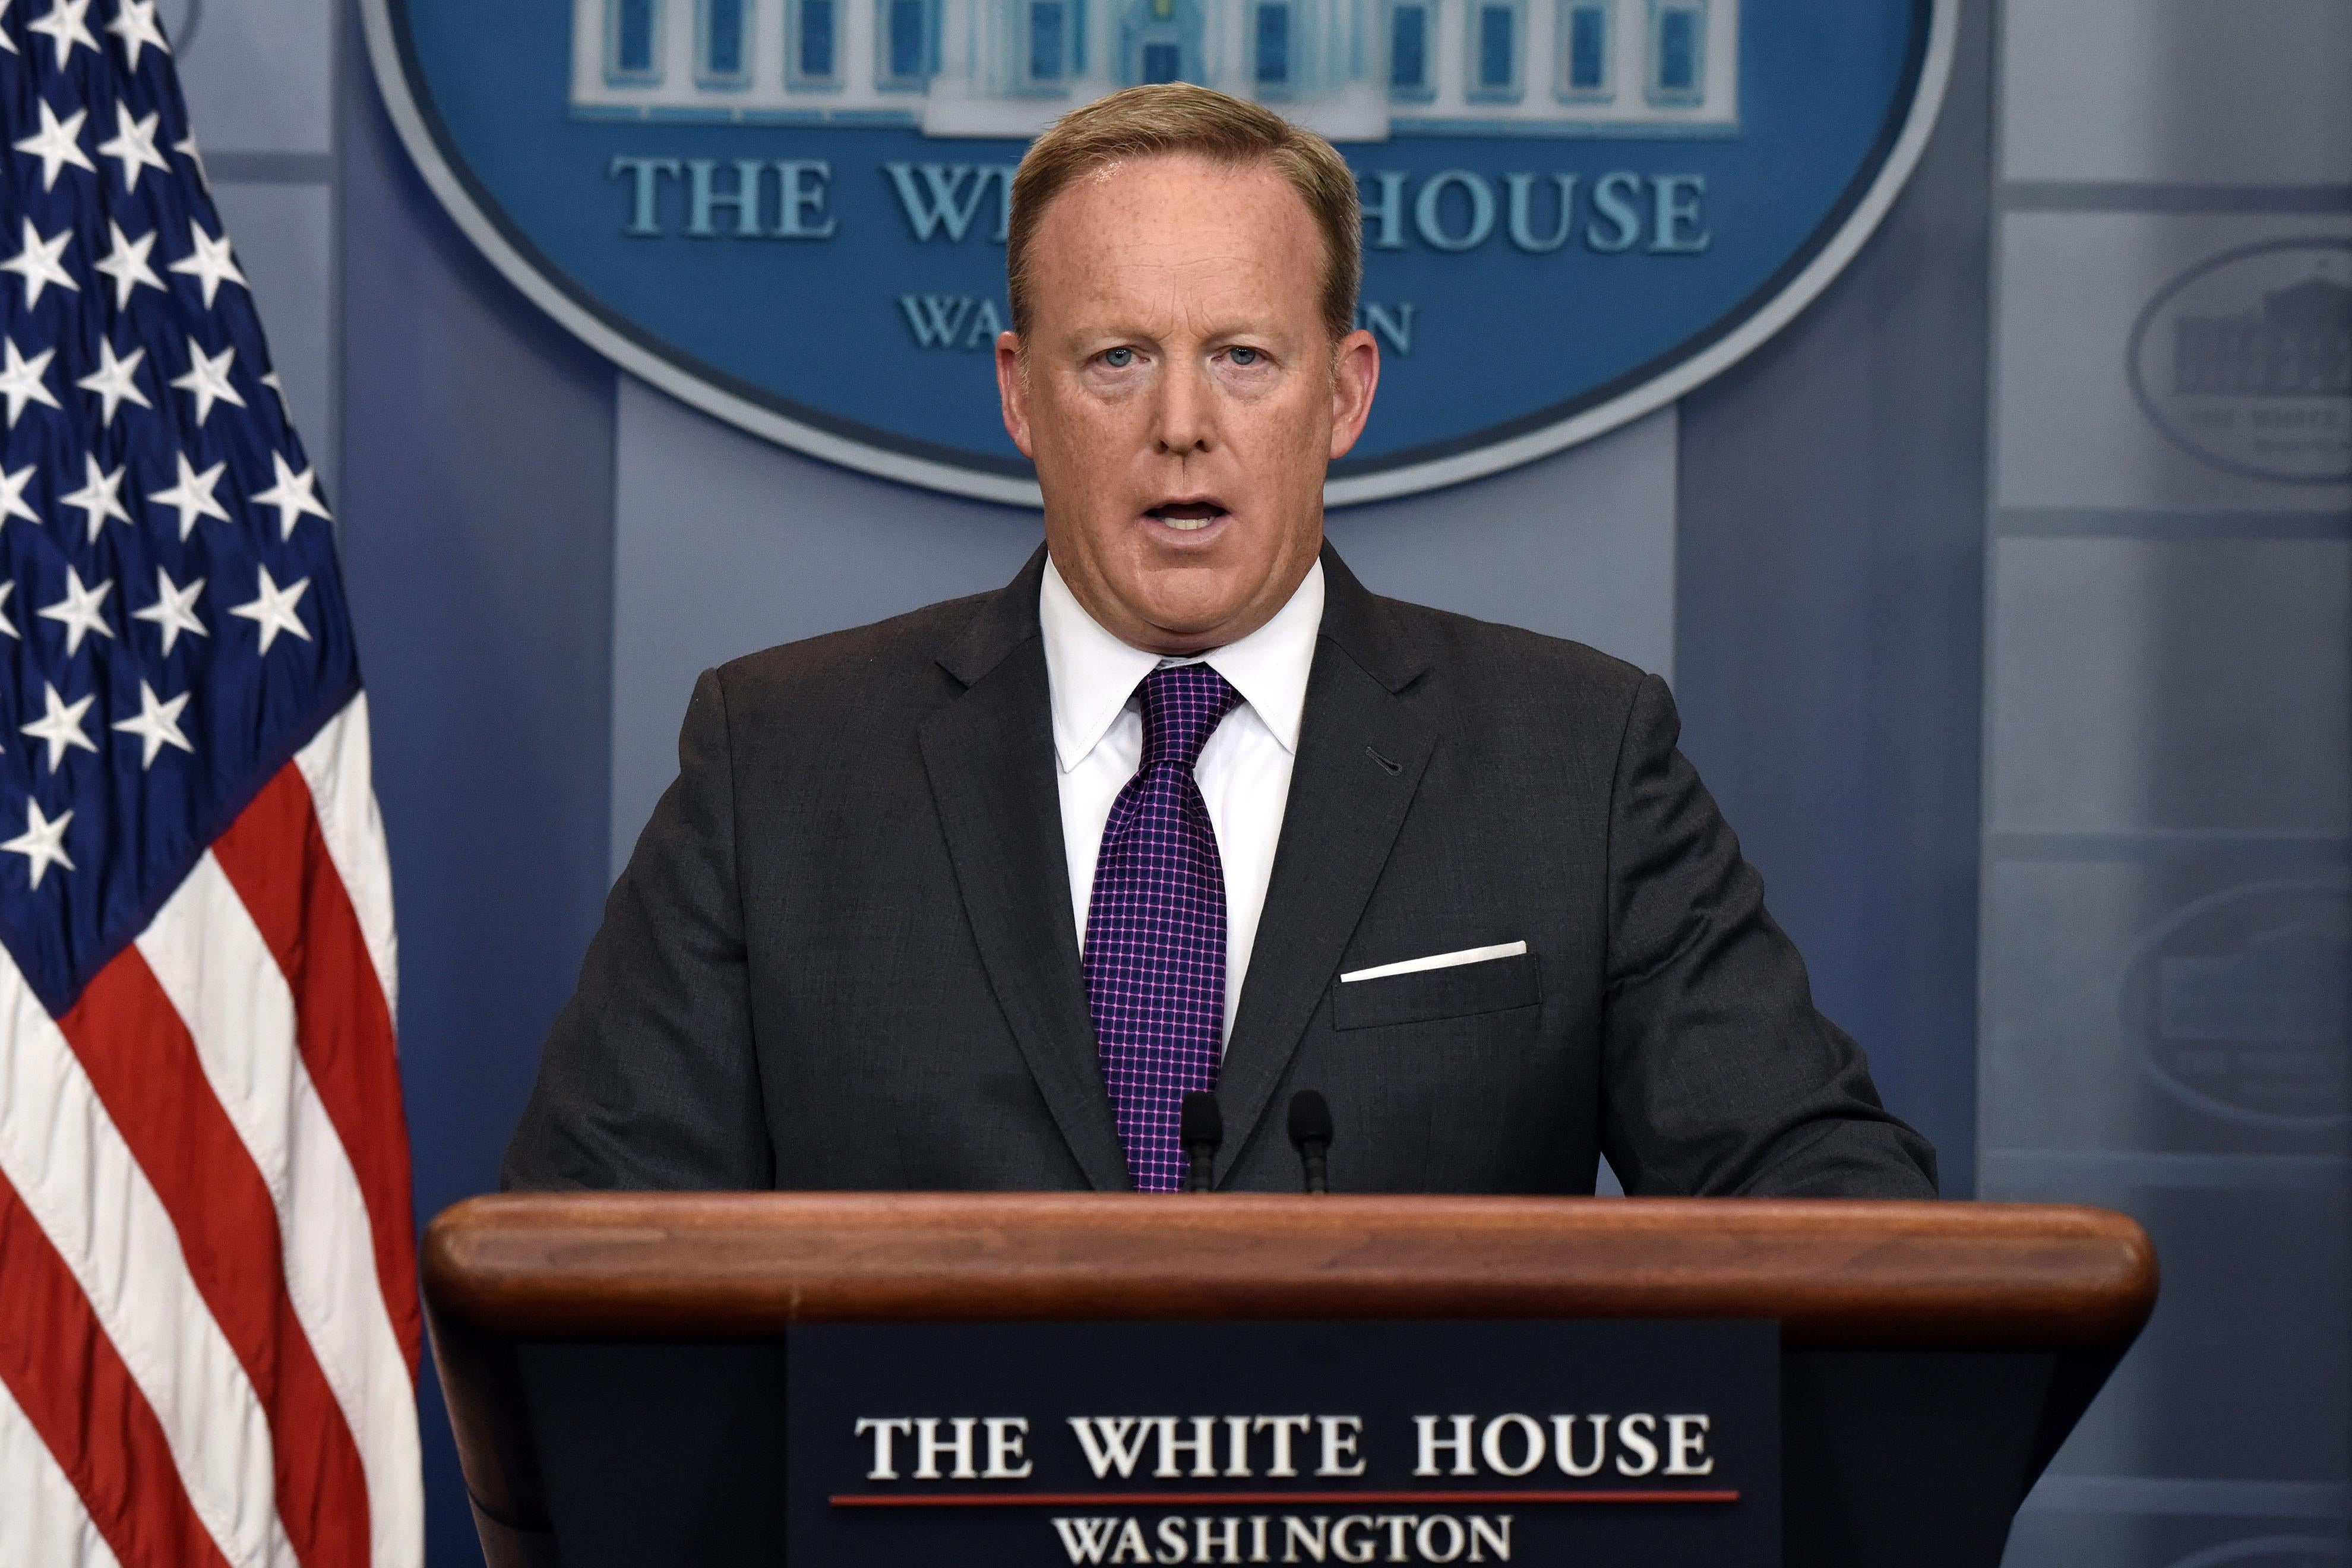 Then-White House Press Secretary Sean Spicer at the podium delivering the daily briefing at the White House on July 17, 2017 in Washington, DC.